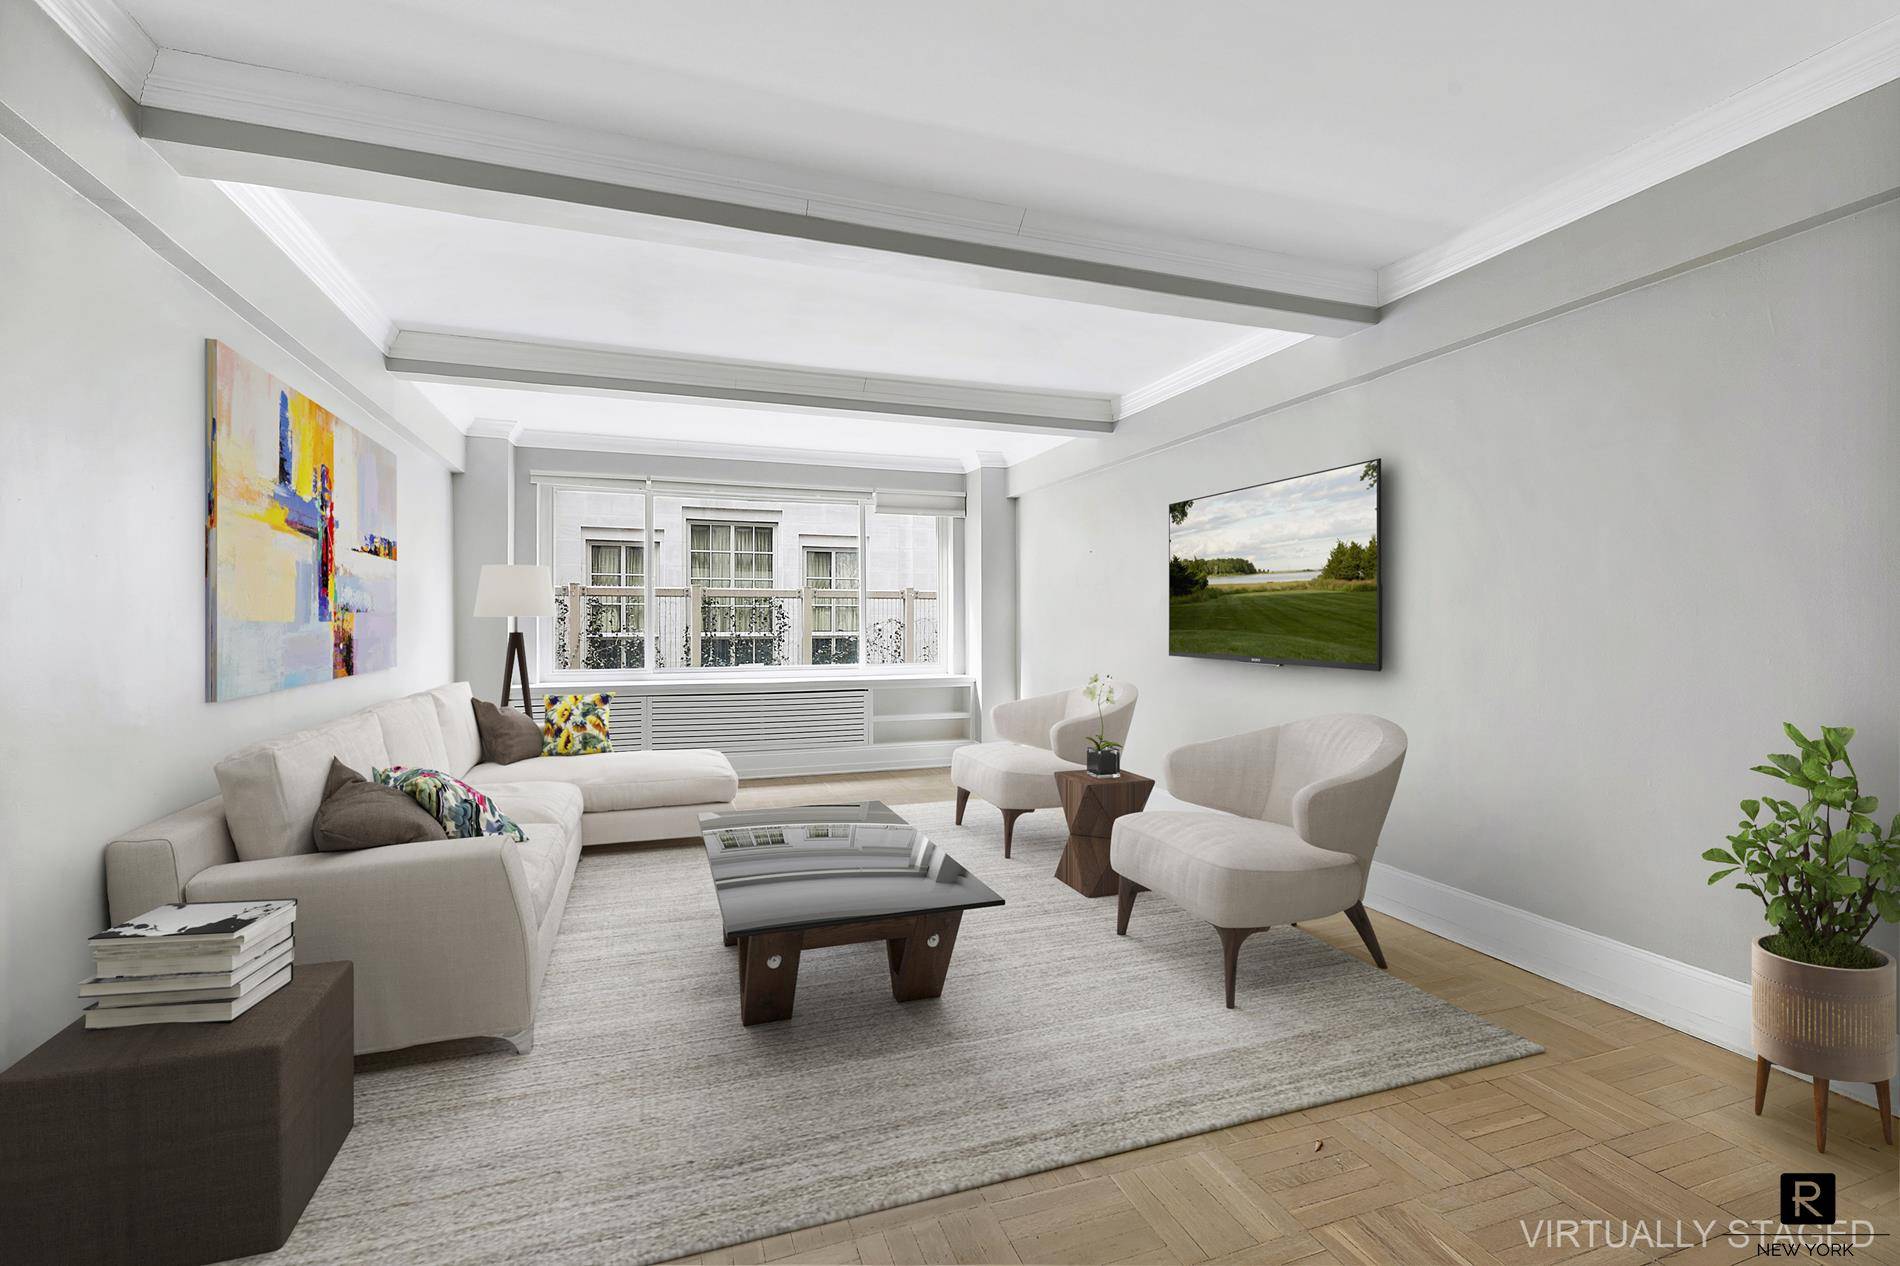 This spacious one bedroom residence boasts an ideal location just across from Central Park in a charming art deco building near Columbus Circle.